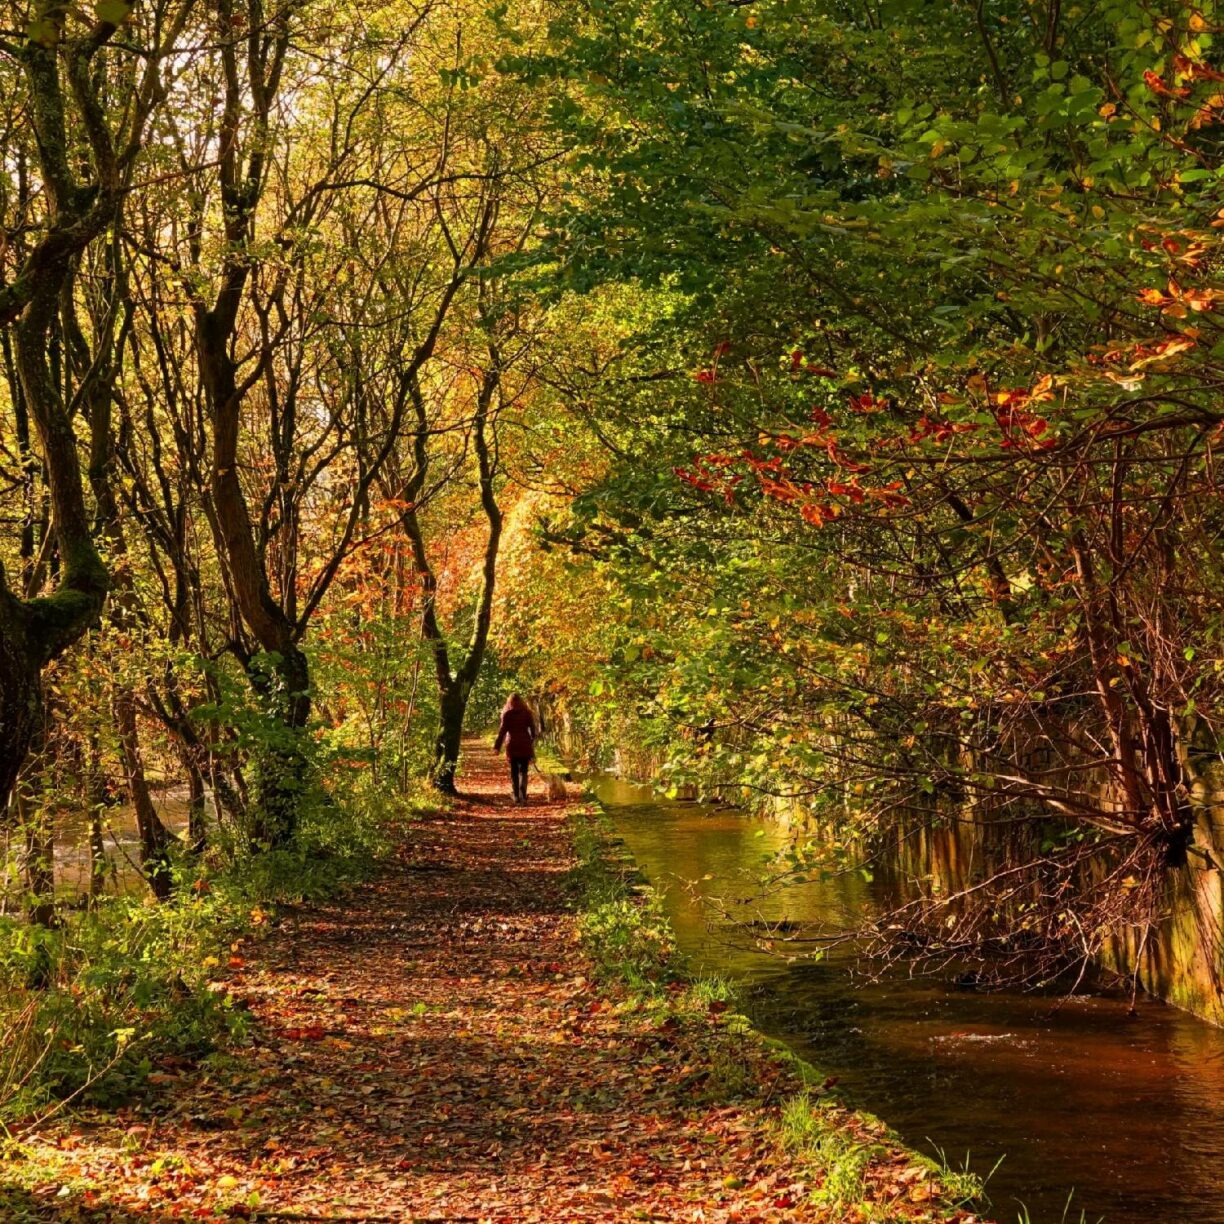 River Holme Connections picture of woman walking her dog along a riverside path in Autumn